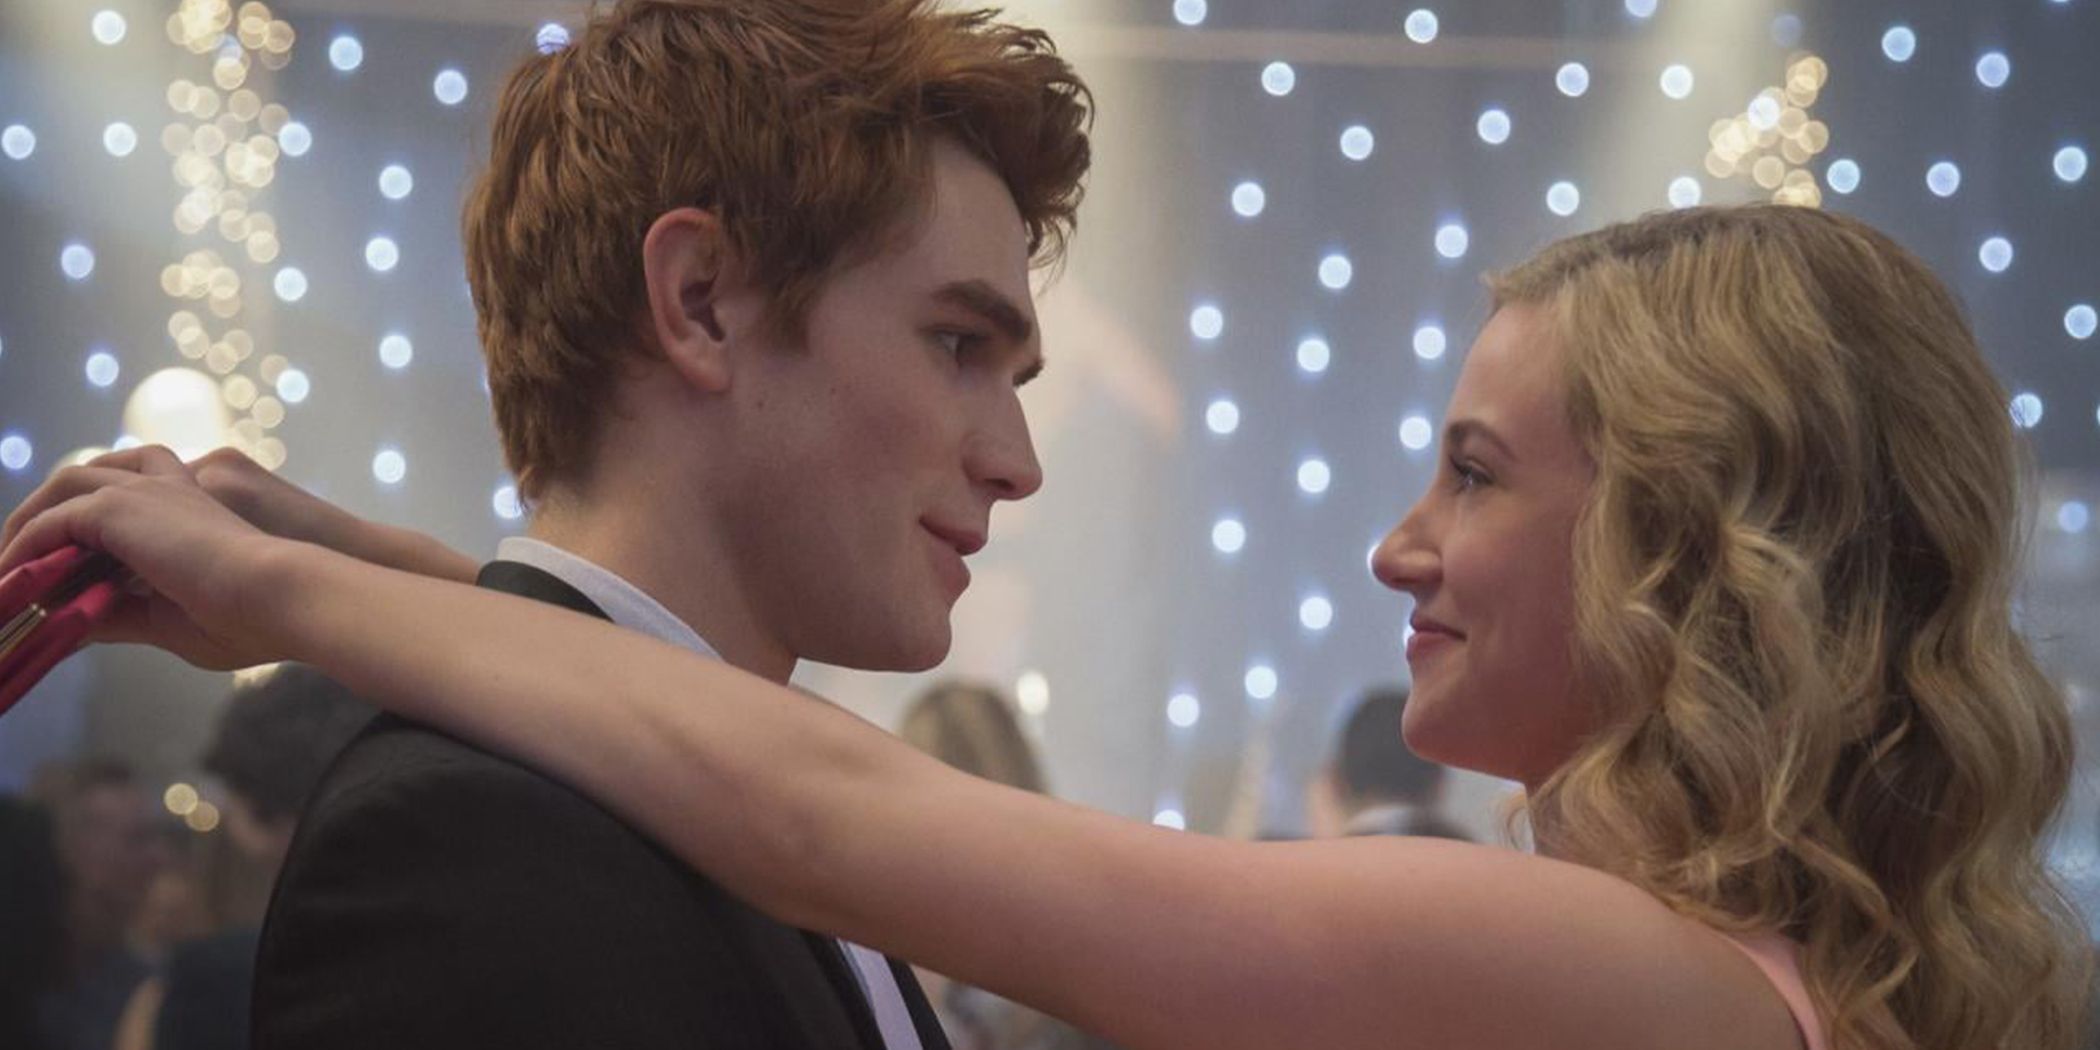 Archie and Betty dance together at Riverdale high dance